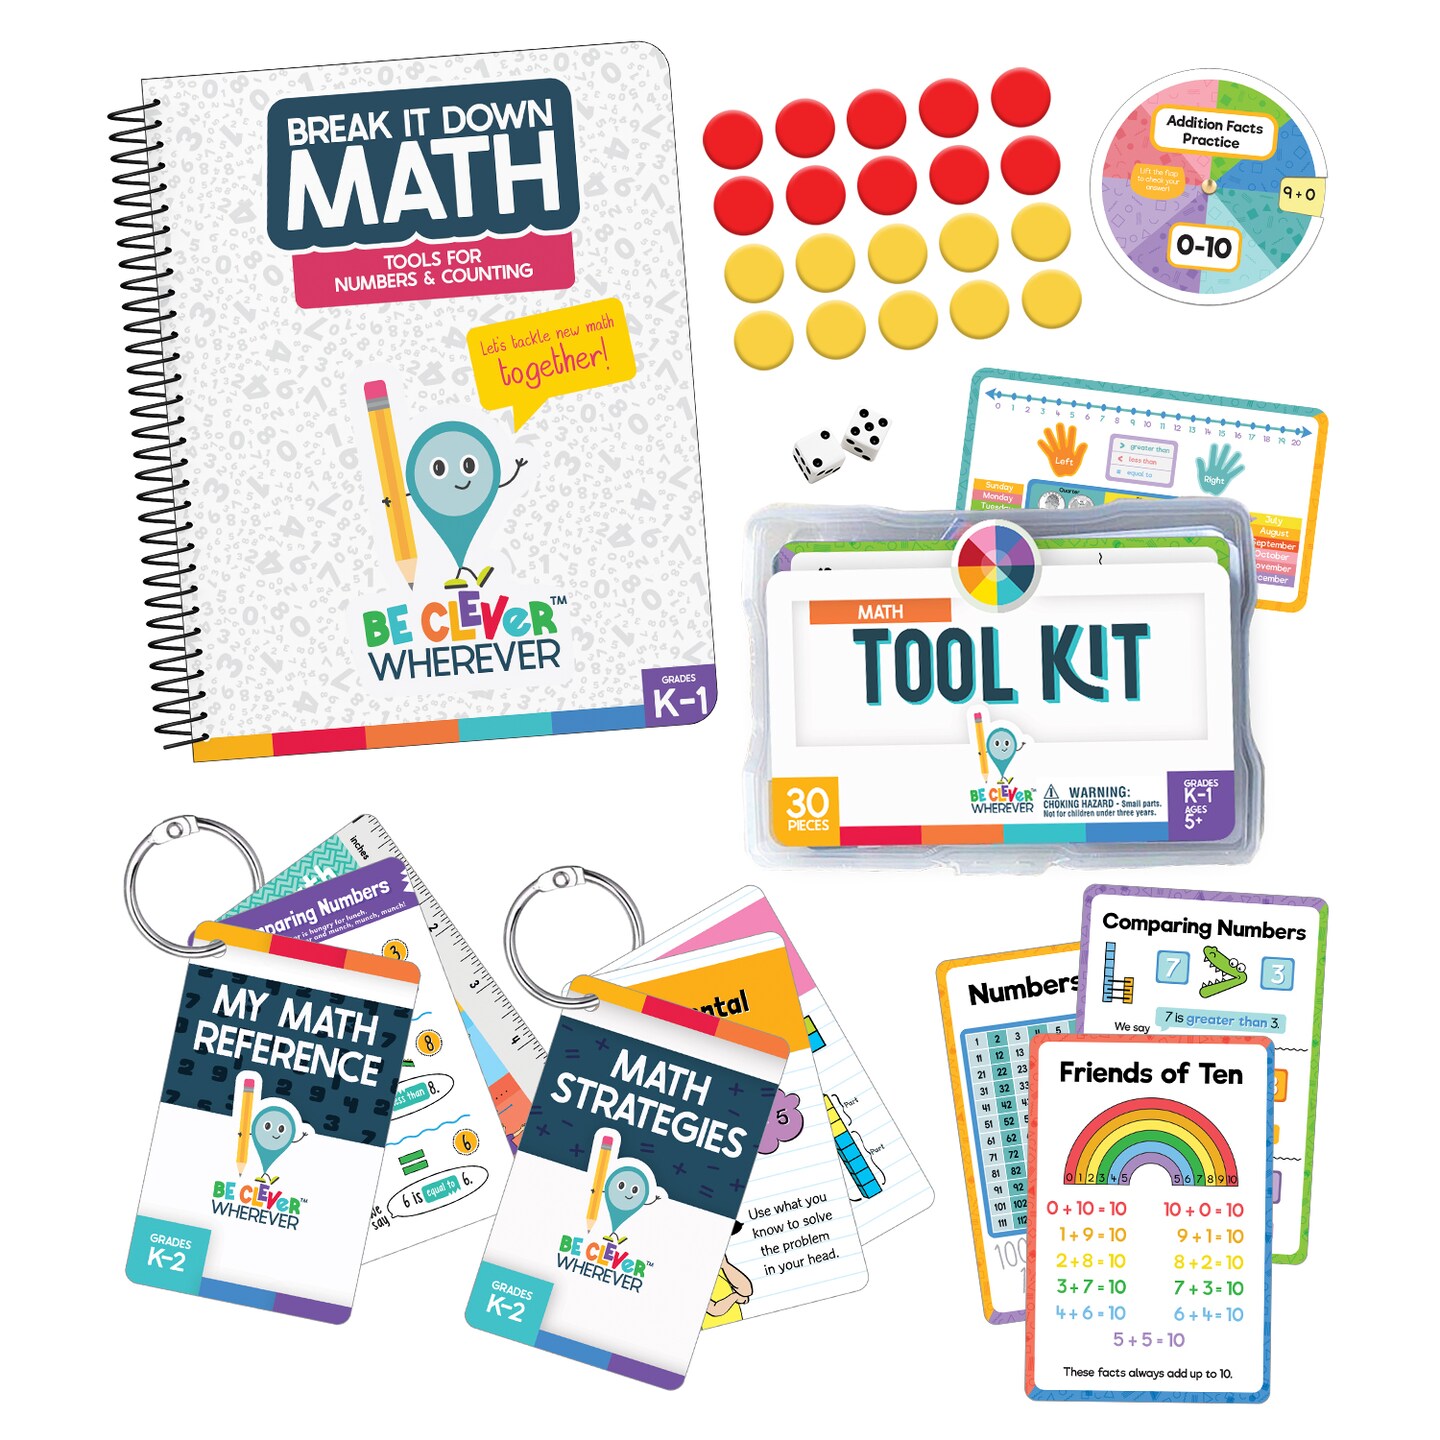 Be Clever Wherever K-1 Math Kit, Kindergarten Math - 1st Grade Math Tool Kit, Tools for Numbers &#x26; Counting Reference Book, My Math Reference &#x26; Math Strategies Things on Rings Math Flash Cards (63 pc)